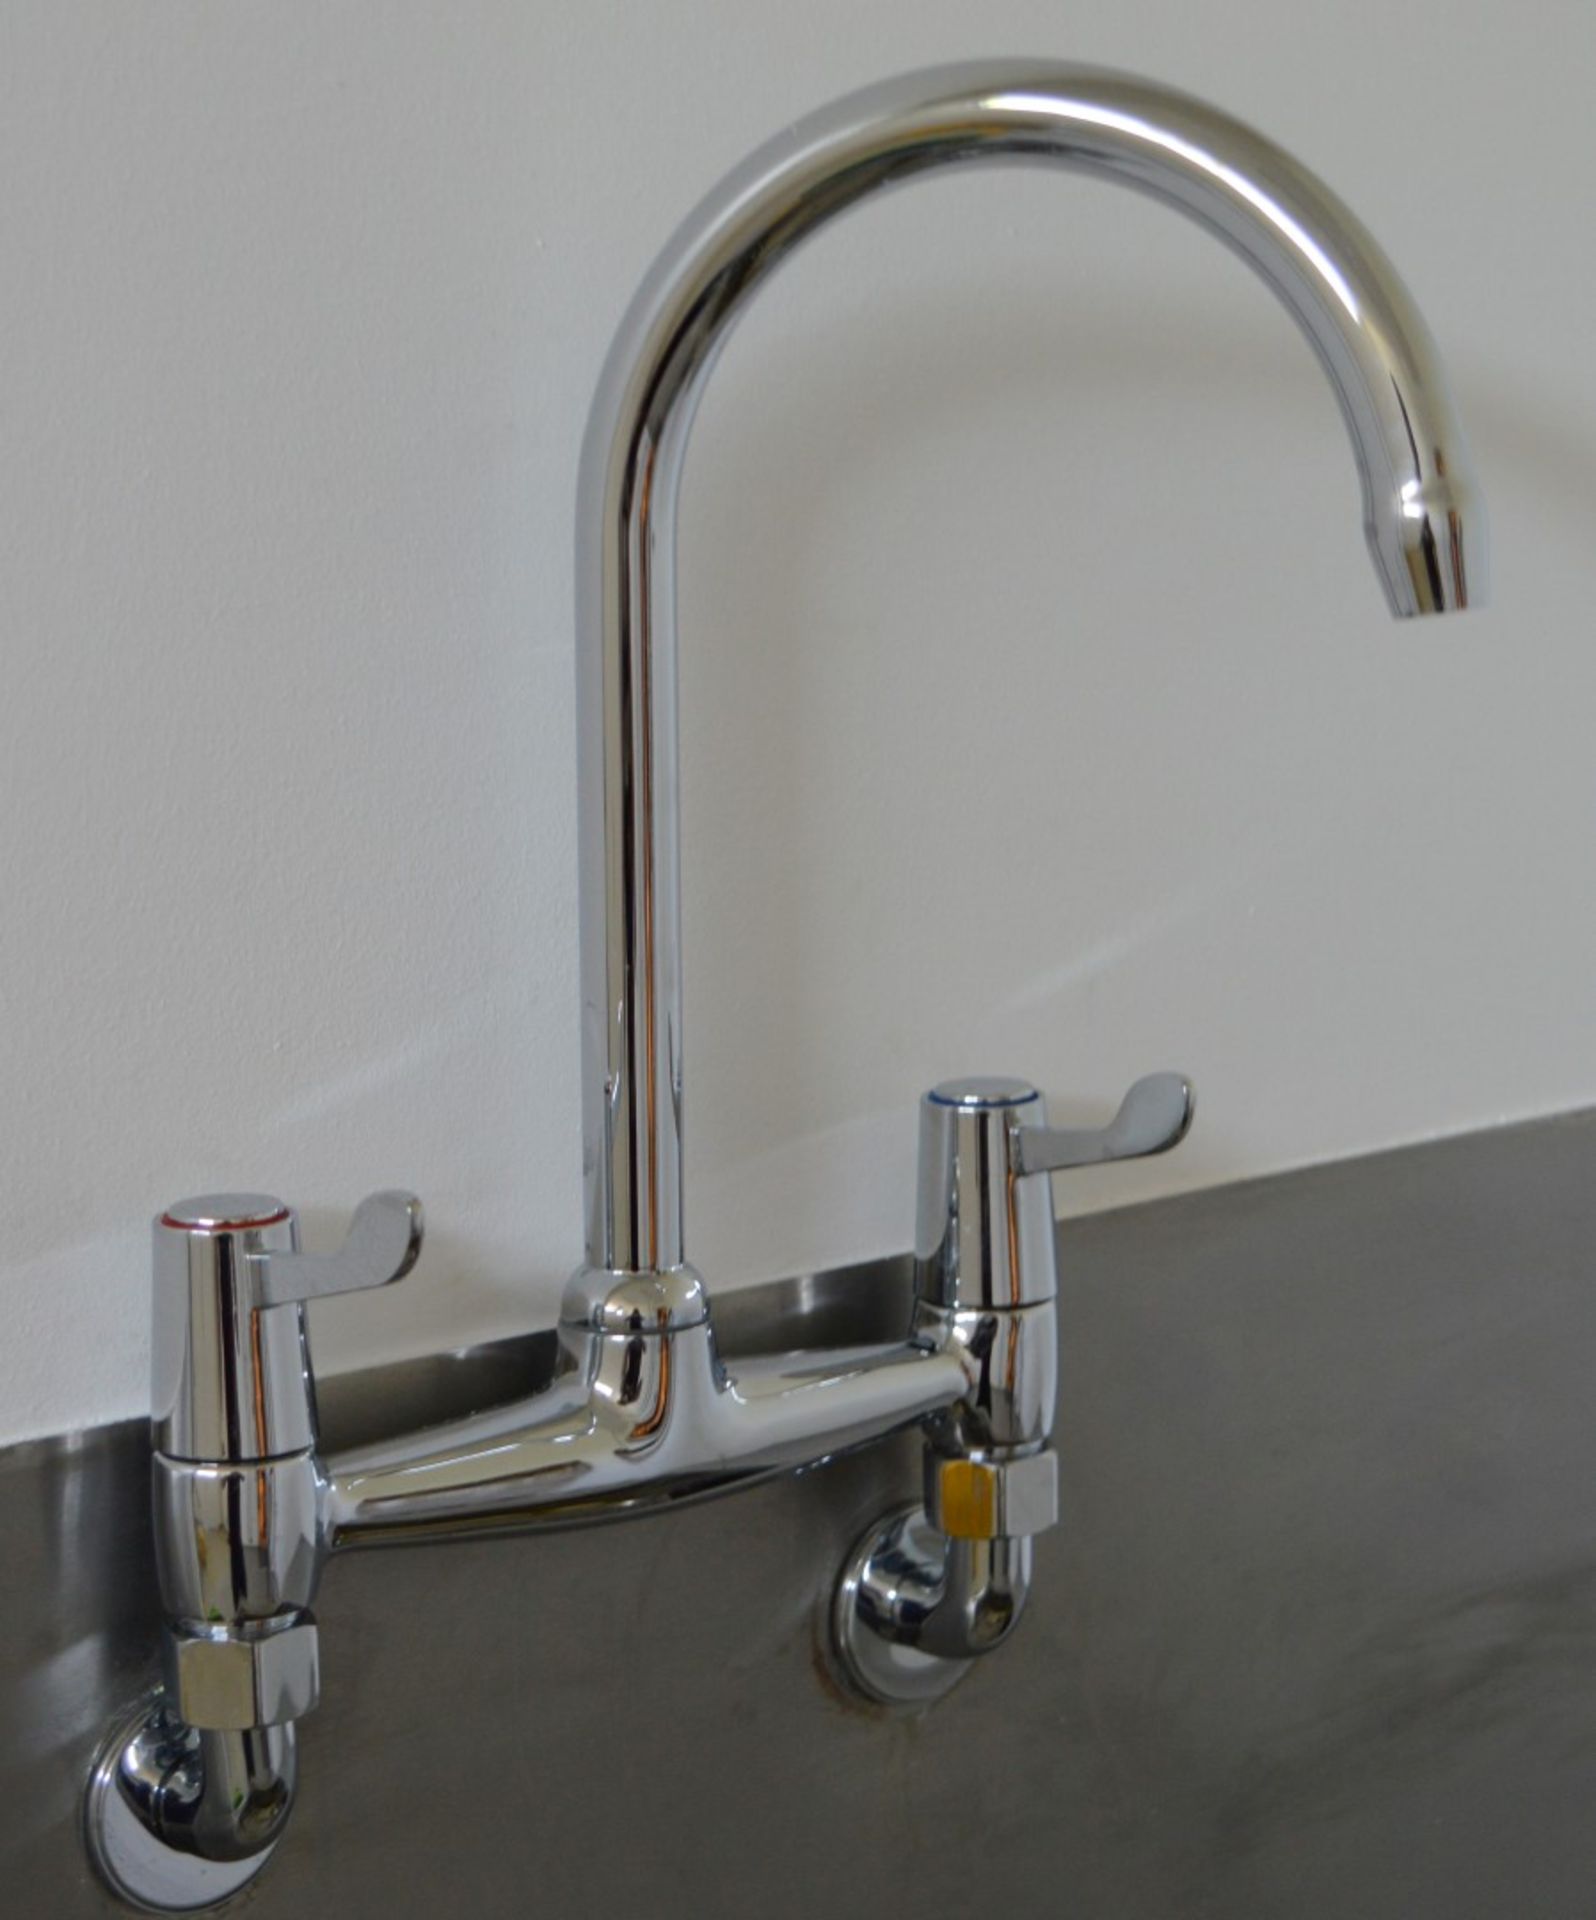 1 x Large Stainless Steel Sink Basin With Drainer - Wall Mounted - Includes Swan Neck Mixer Tap - - Image 3 of 4